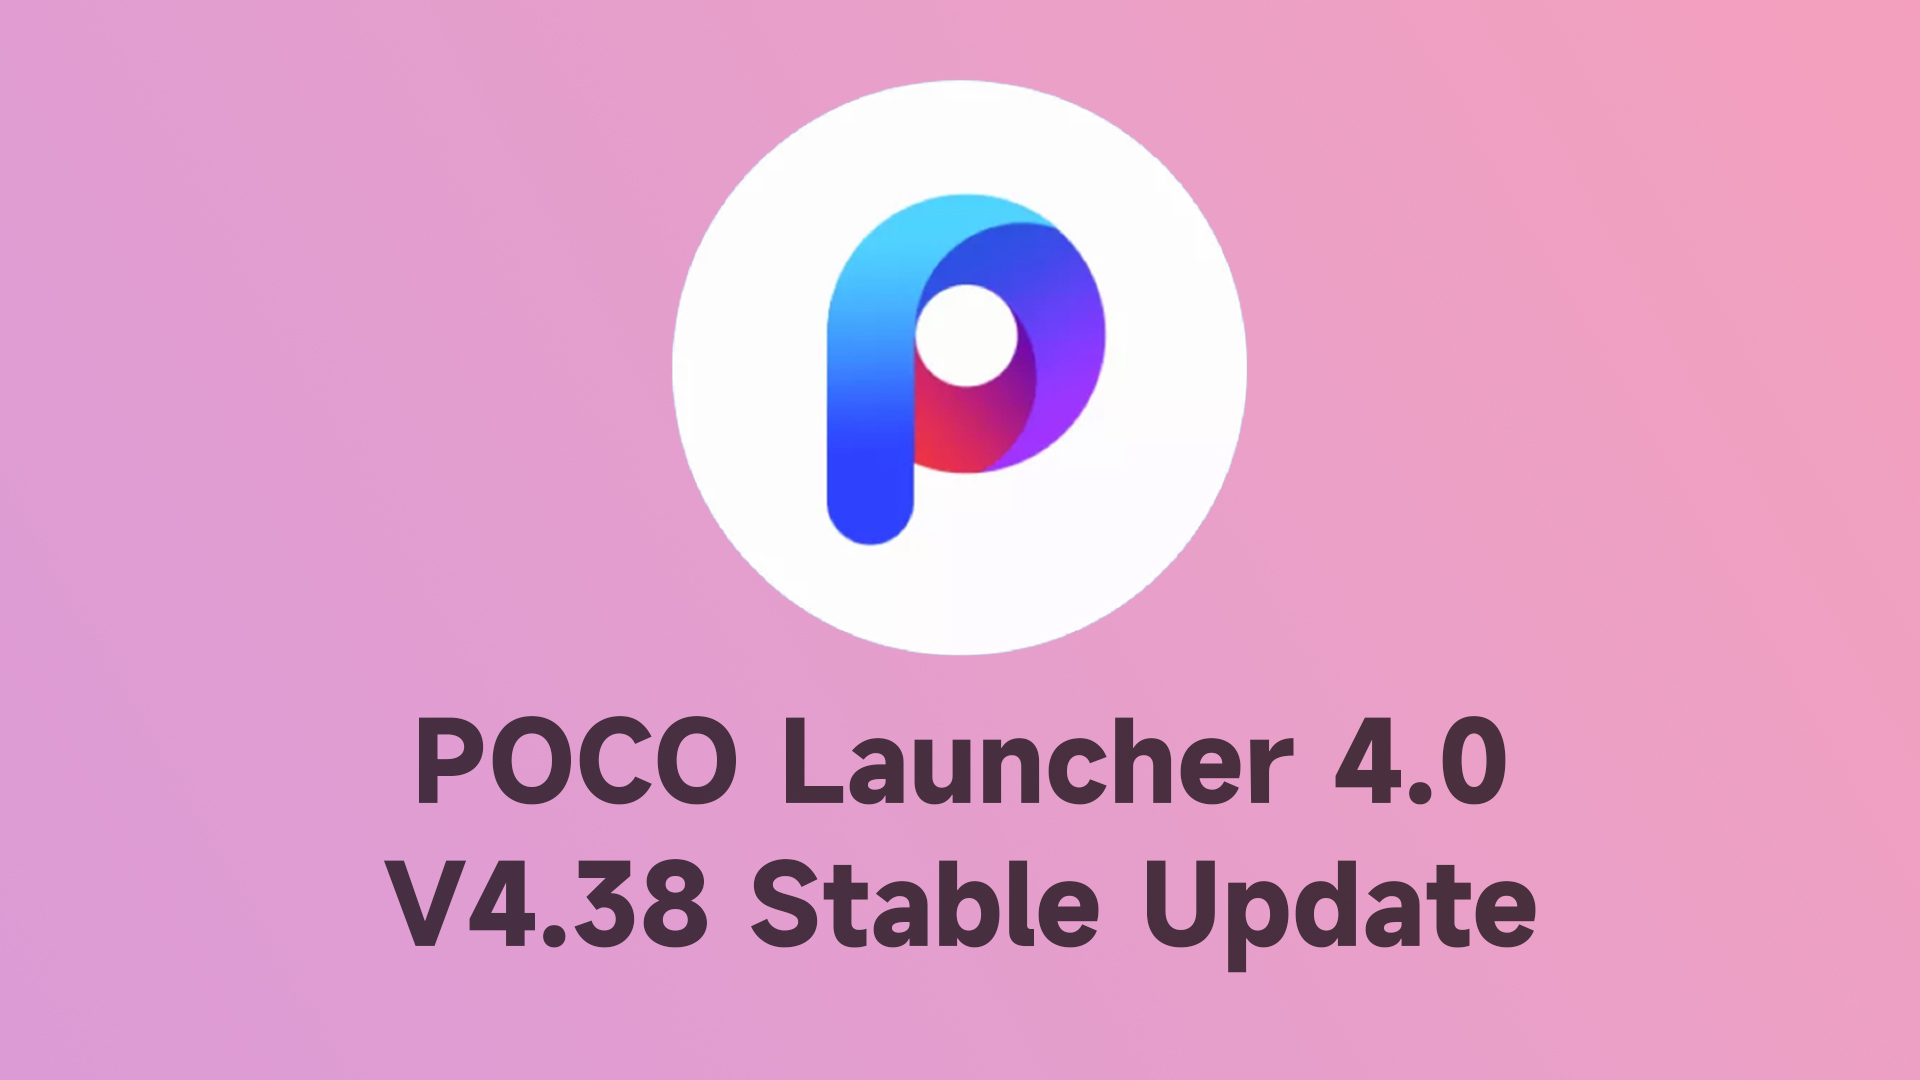 POCO Launcher 4.0 stable update released with new features! [V4.38]